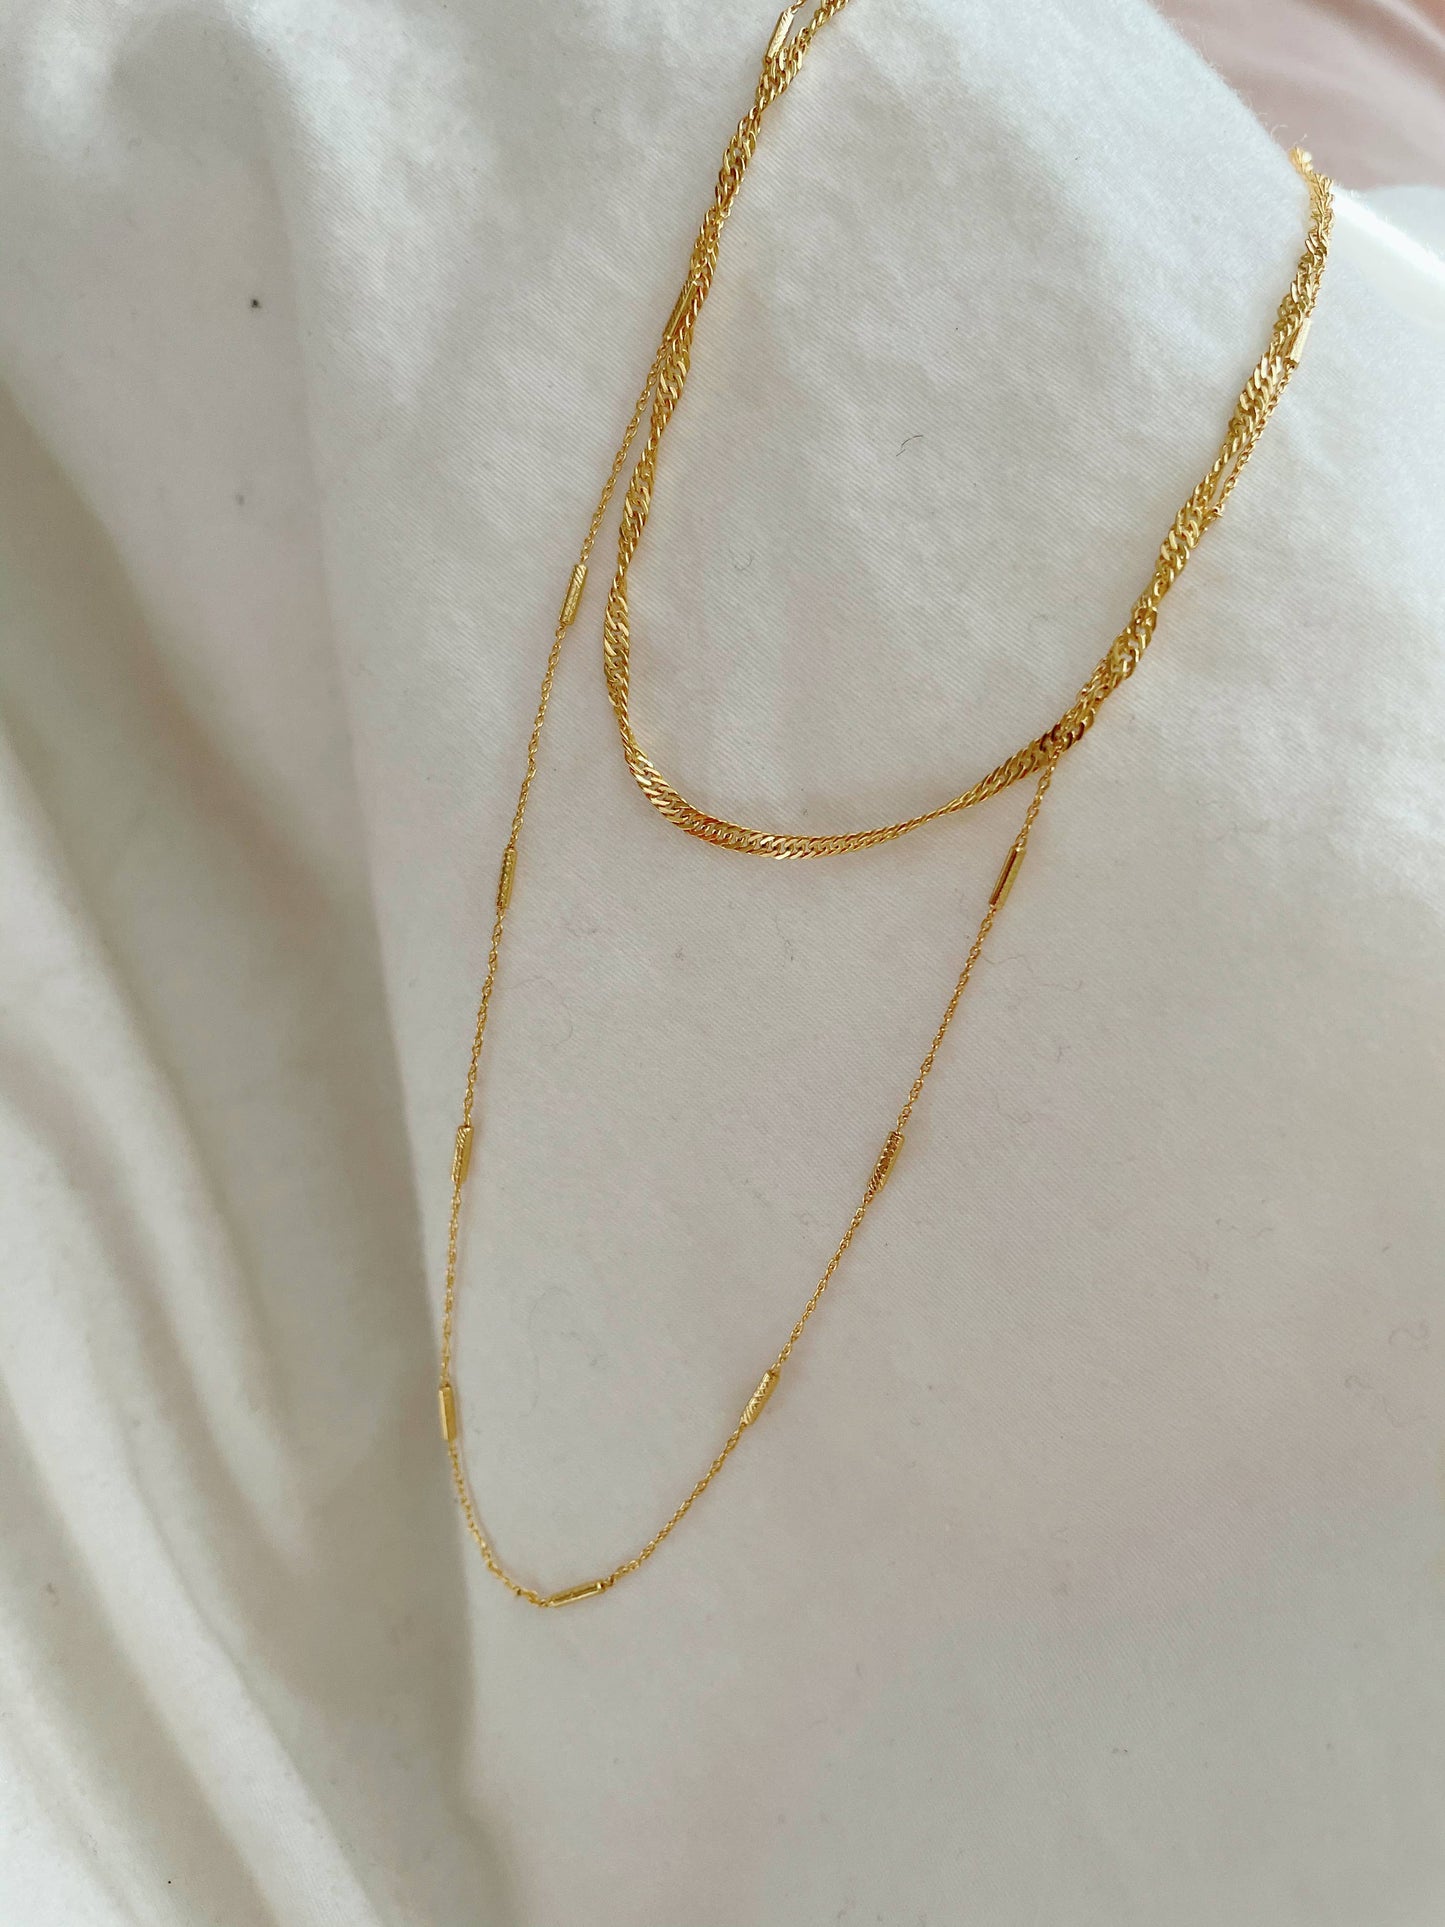 The Night Away 24k Gold Filled Simple Chain  Necklace